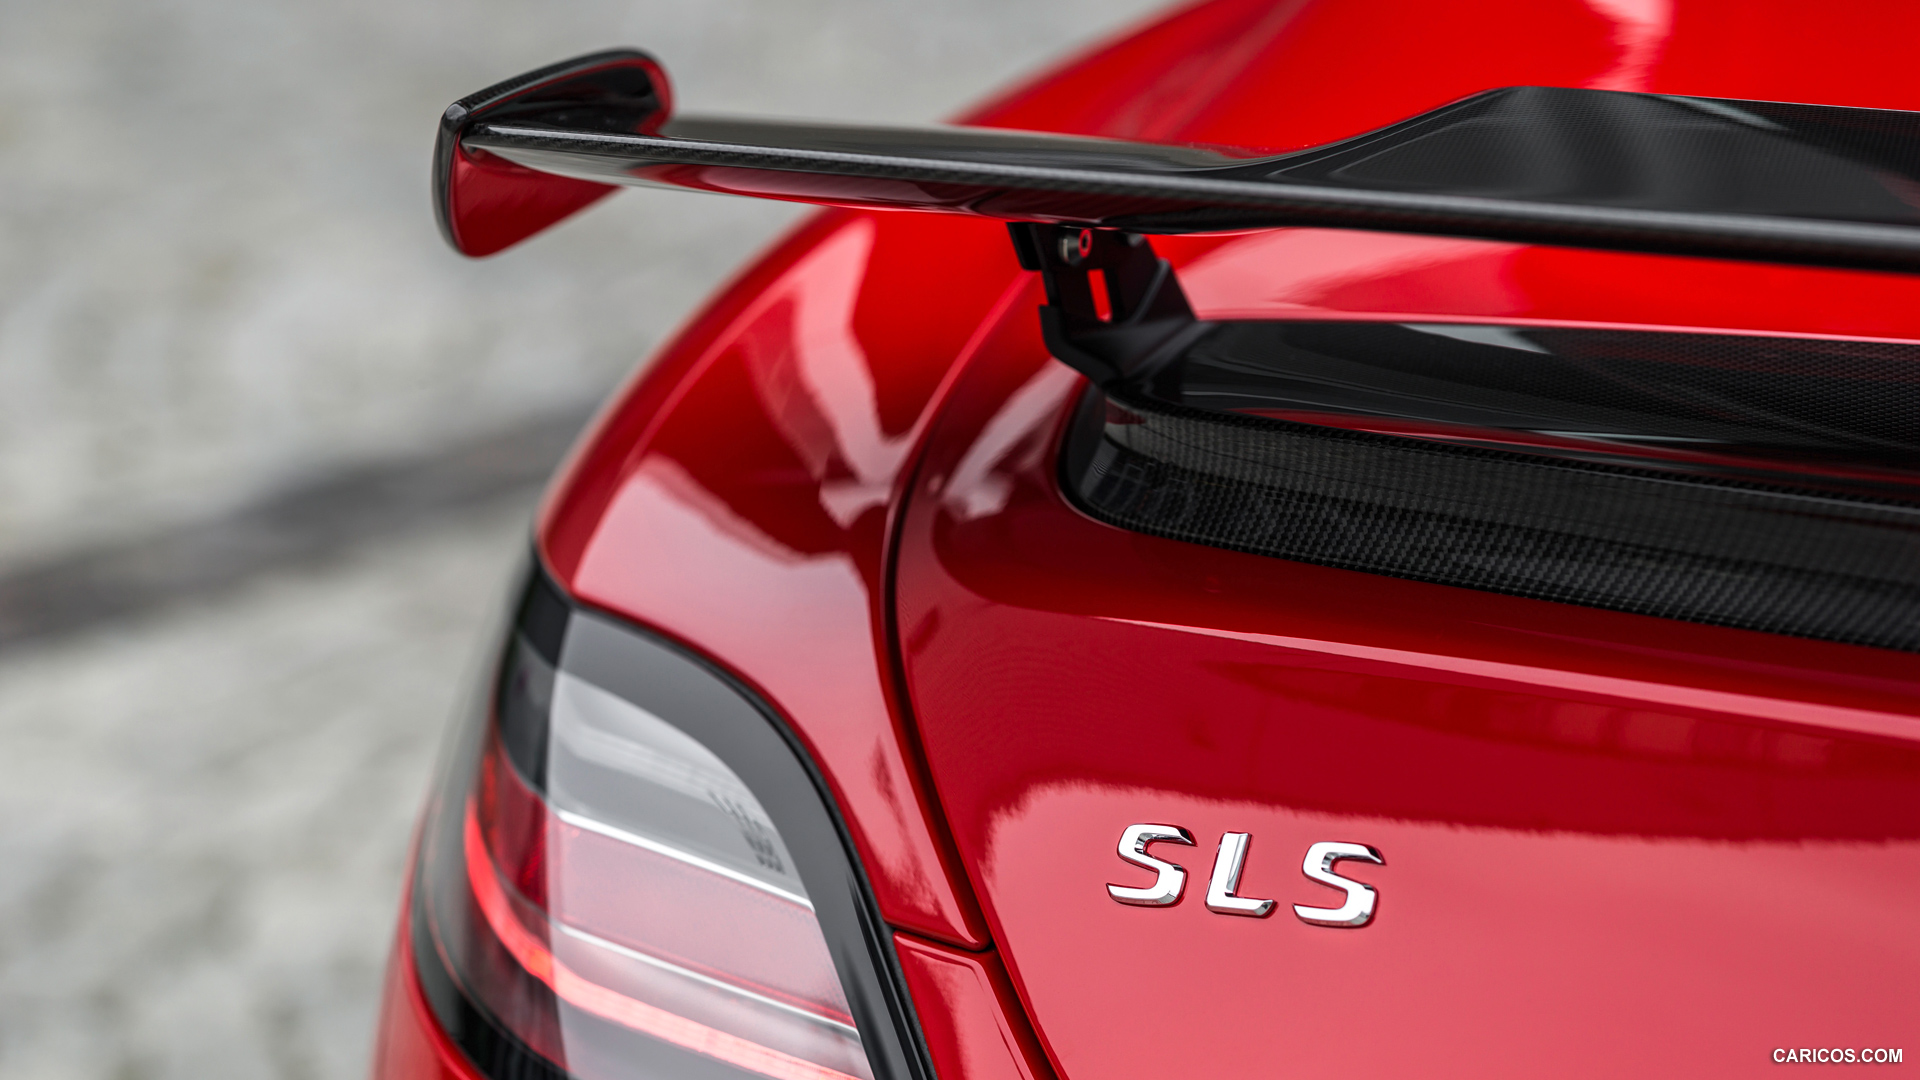  2015 Mercedes-Benz SLS AMG GT Coupe Final Edition - Spoiler, #30 of 41